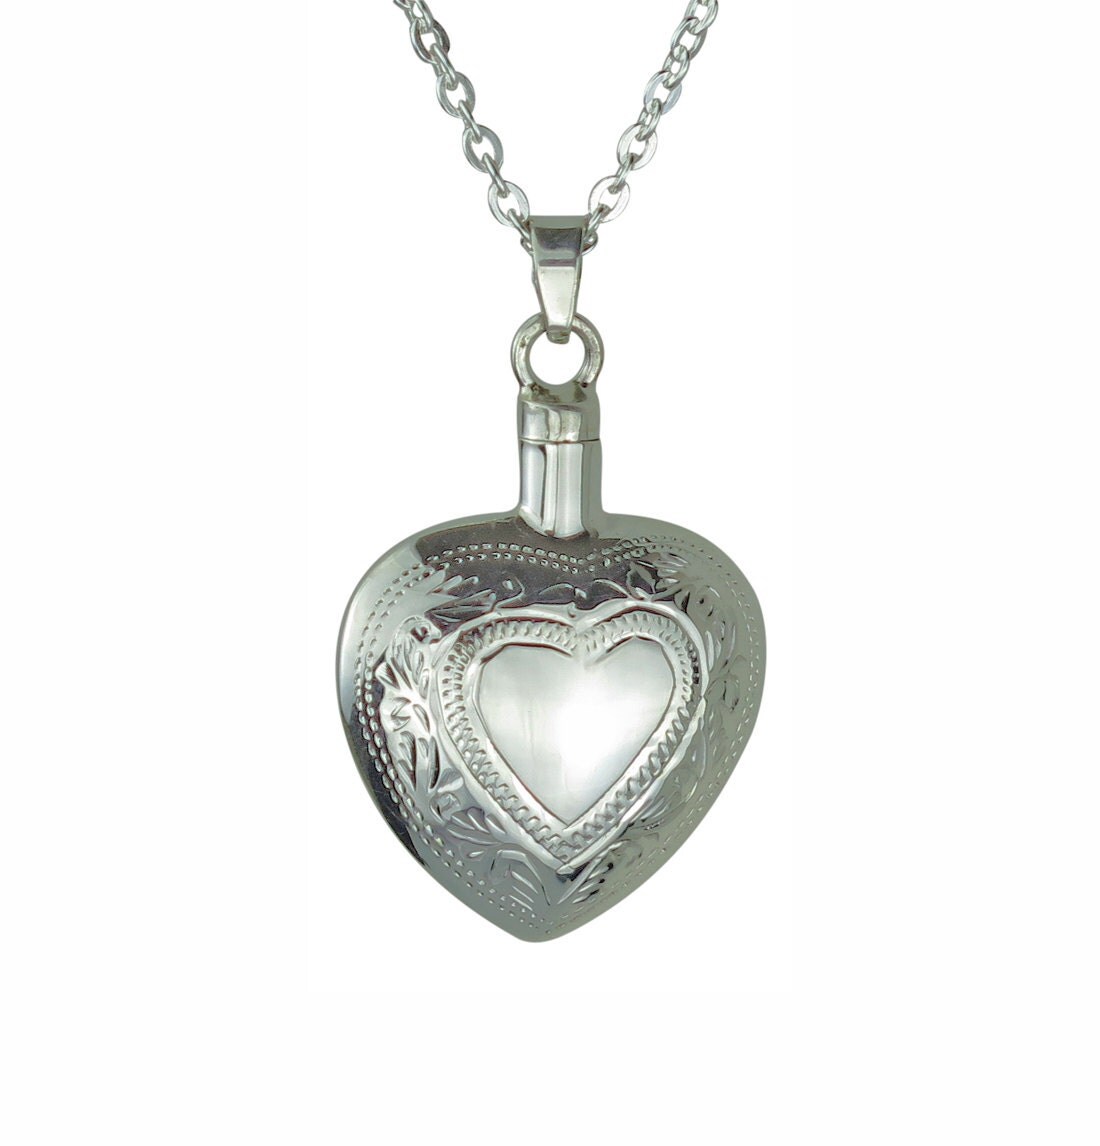 Solid Sterling Silver Patterned Heart Cremation Memorial Ashes